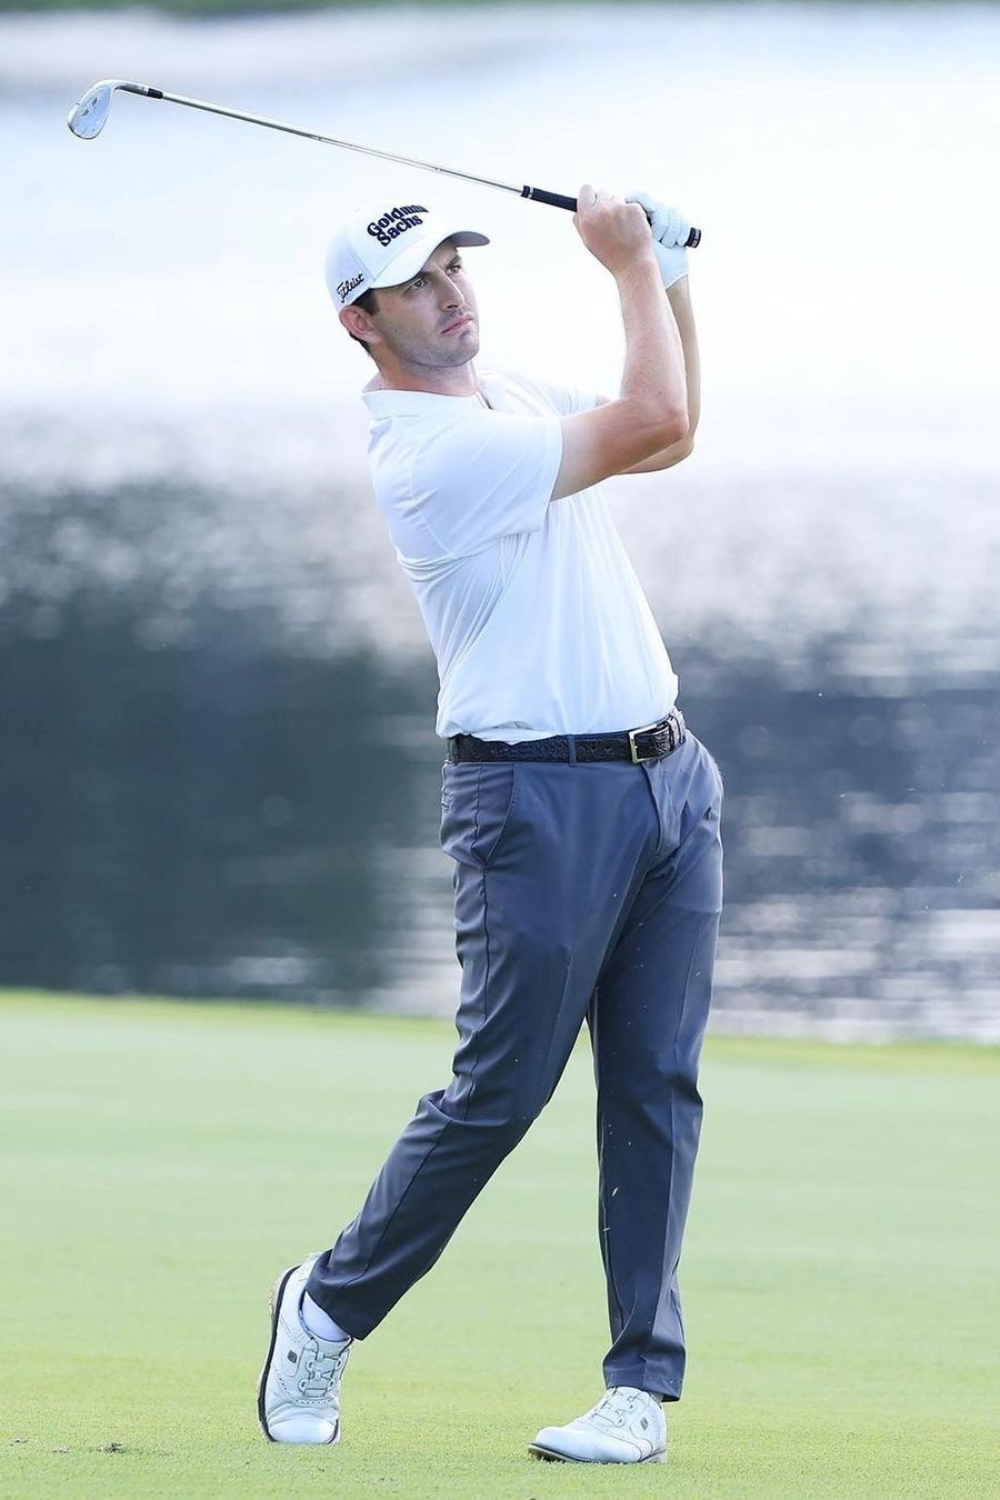 Patrick Cantlay, A Professional Golfer